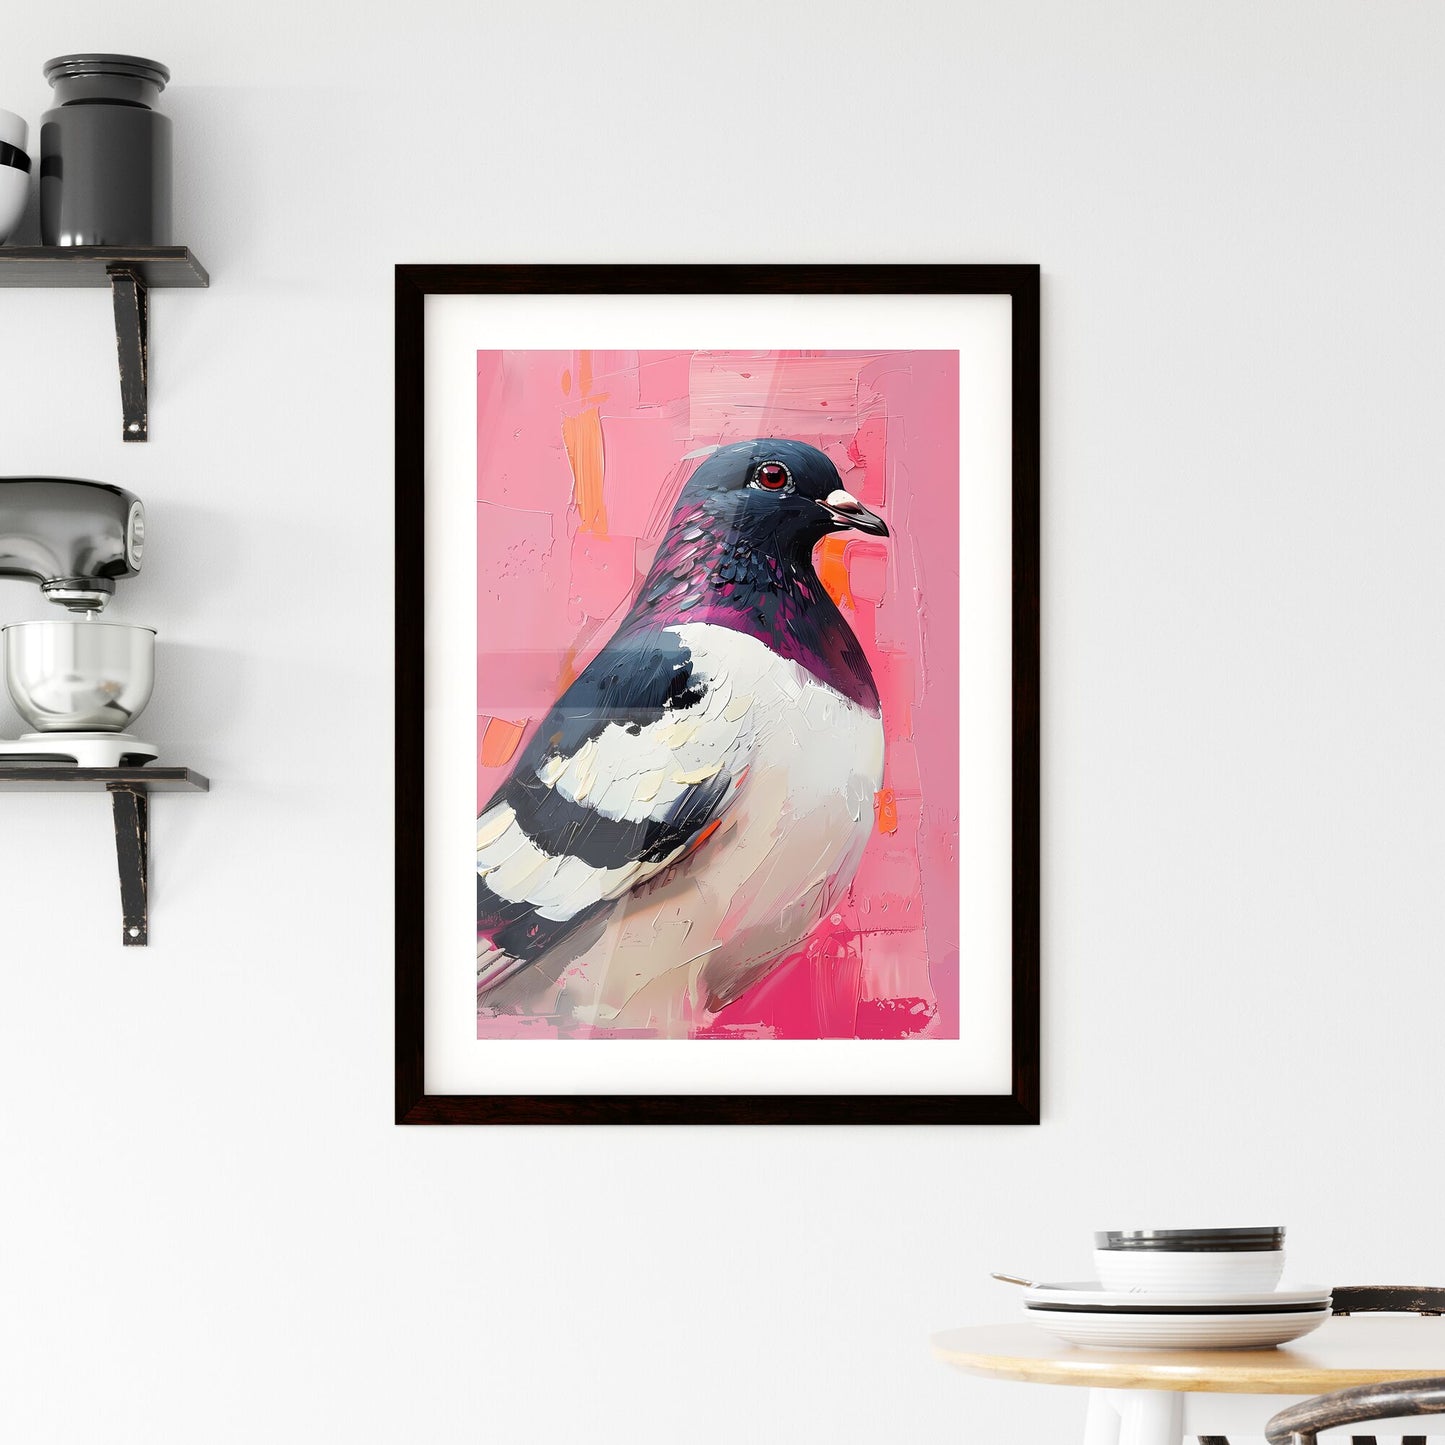 Vivid Impressionist Painting of a Pigeon in Vibrant Hues on a Pink Canvas Default Title